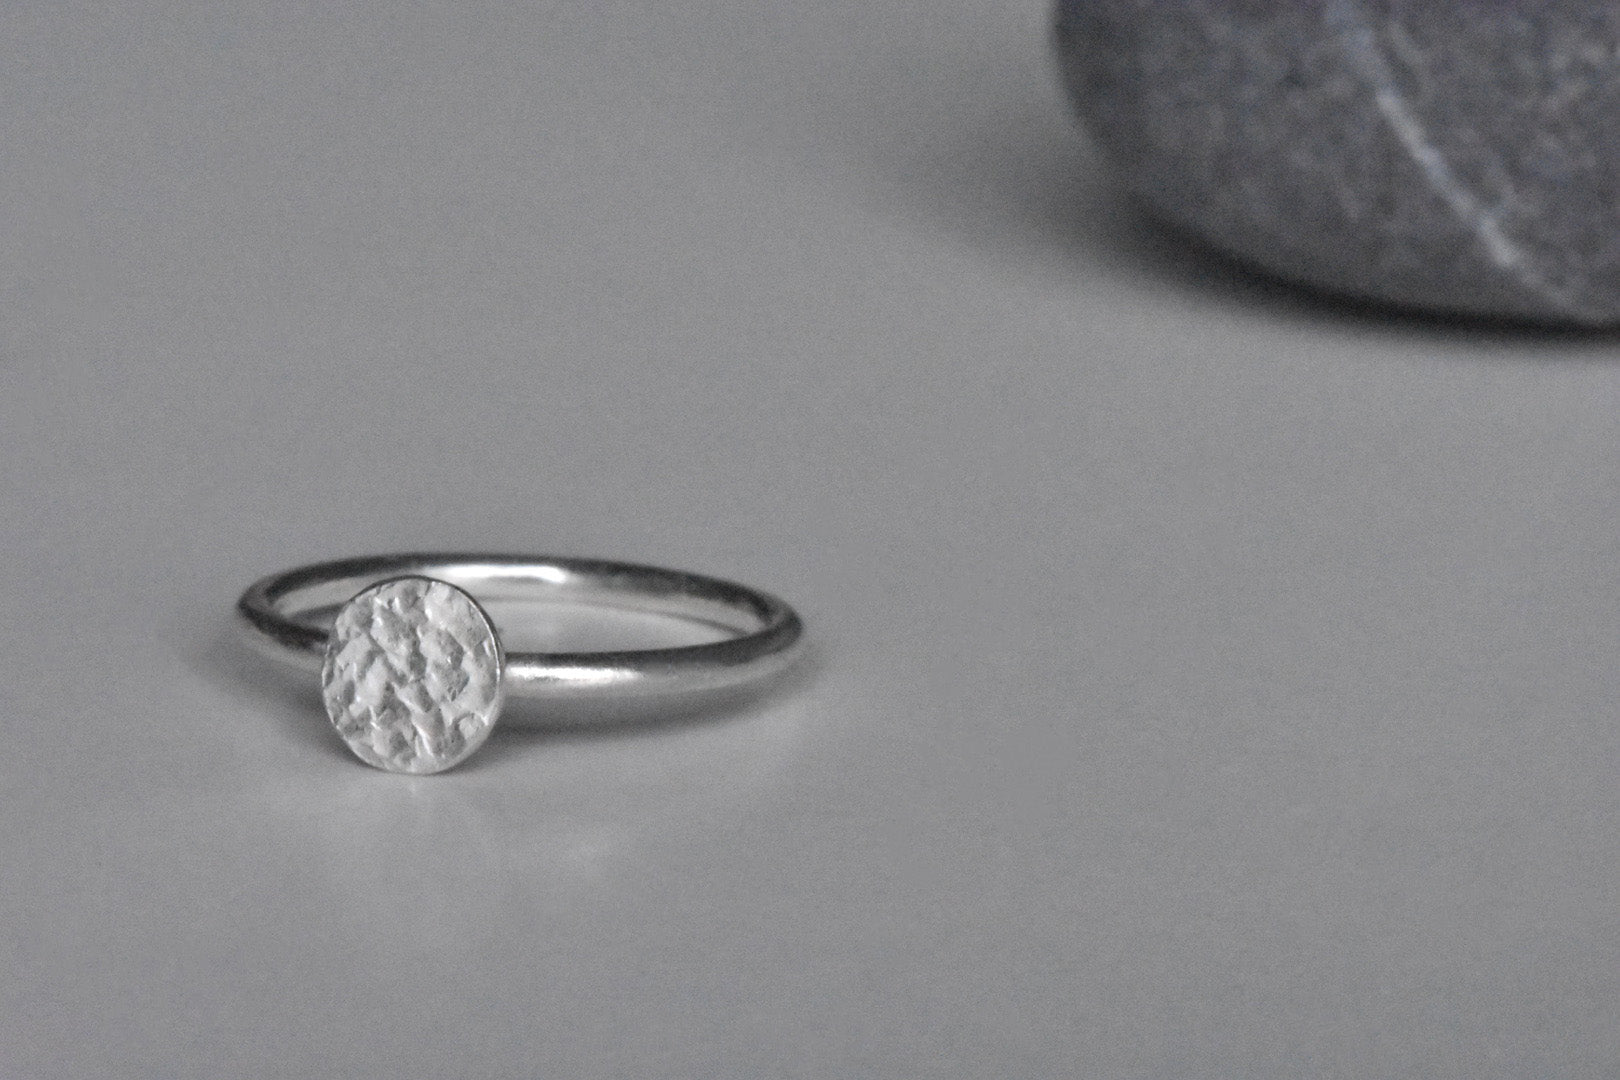 Handmade Eco Silver Textured Coin Stacking Ring, coin facing slightly to the left.